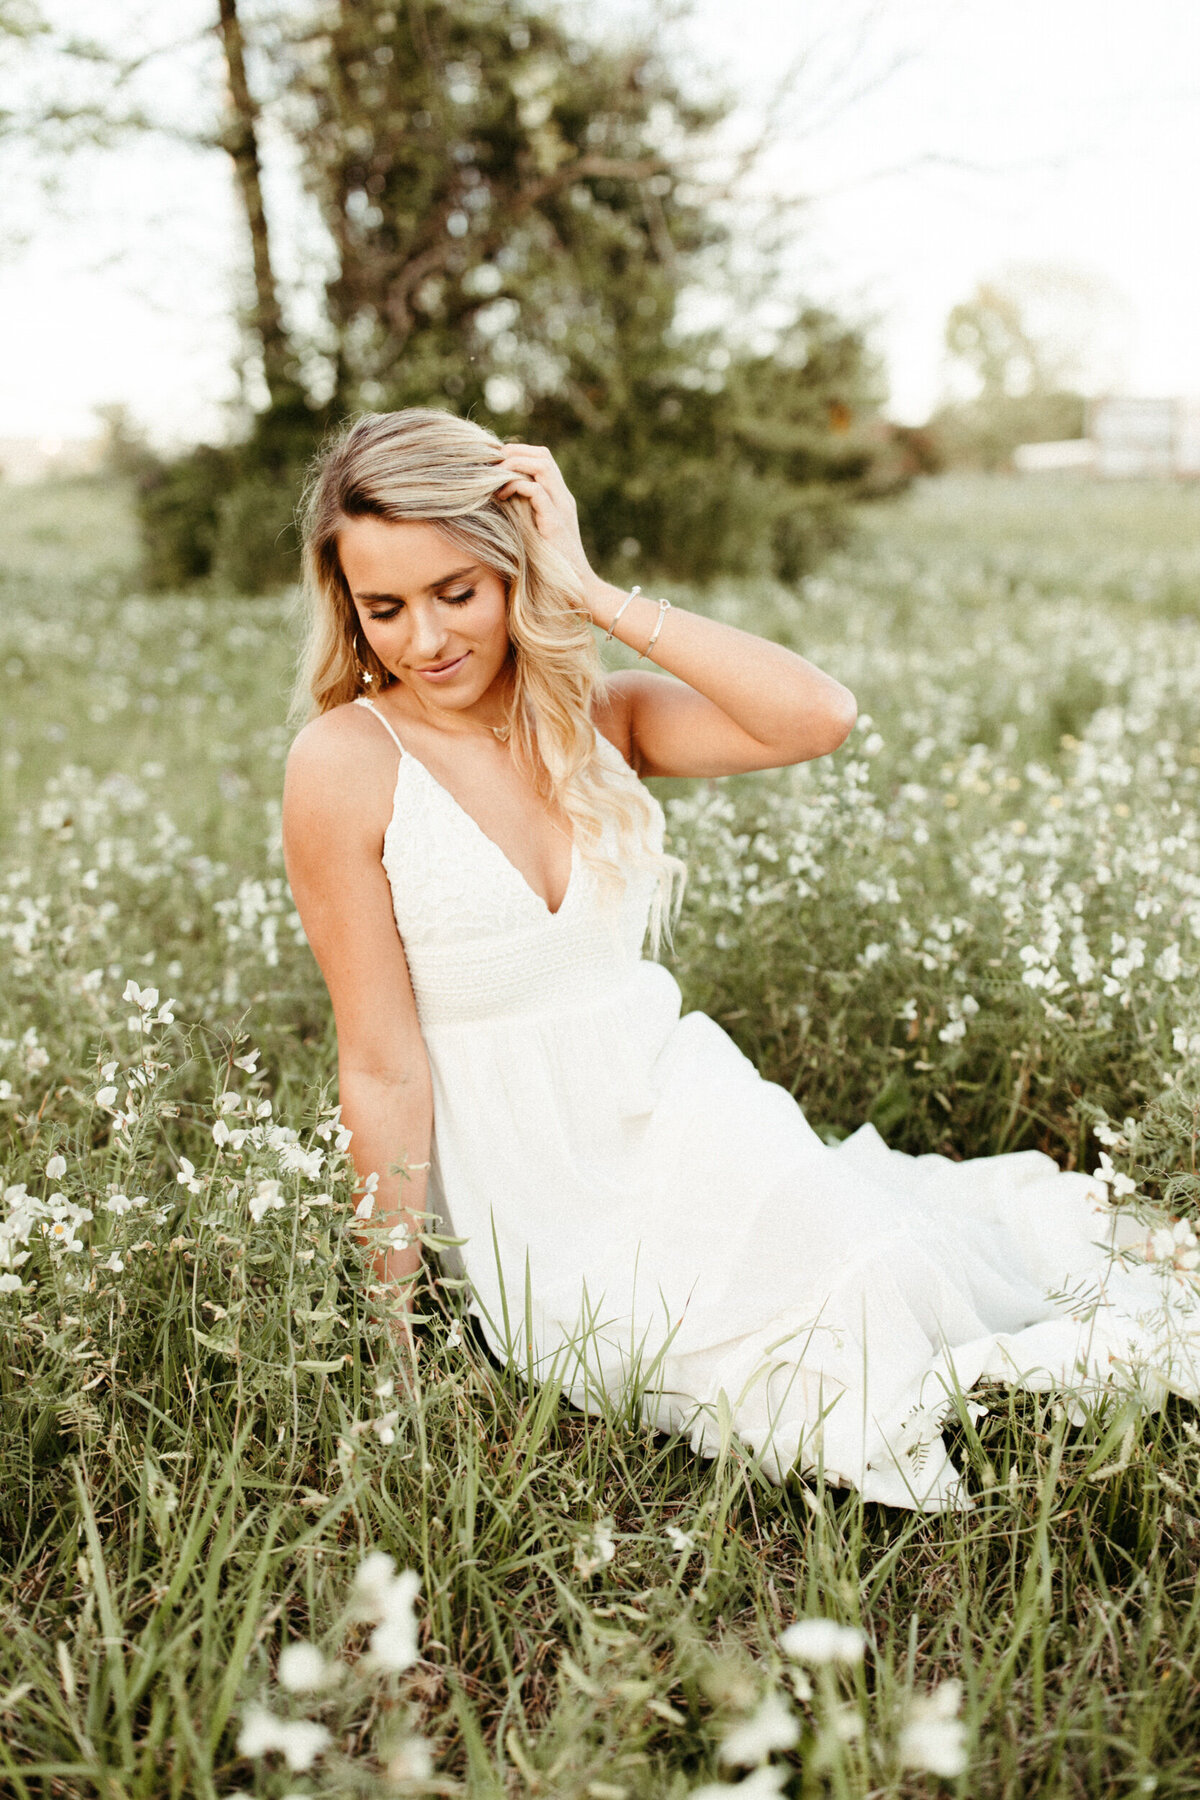 High school senior in long white boho dress sitting in a field with white wildflowers